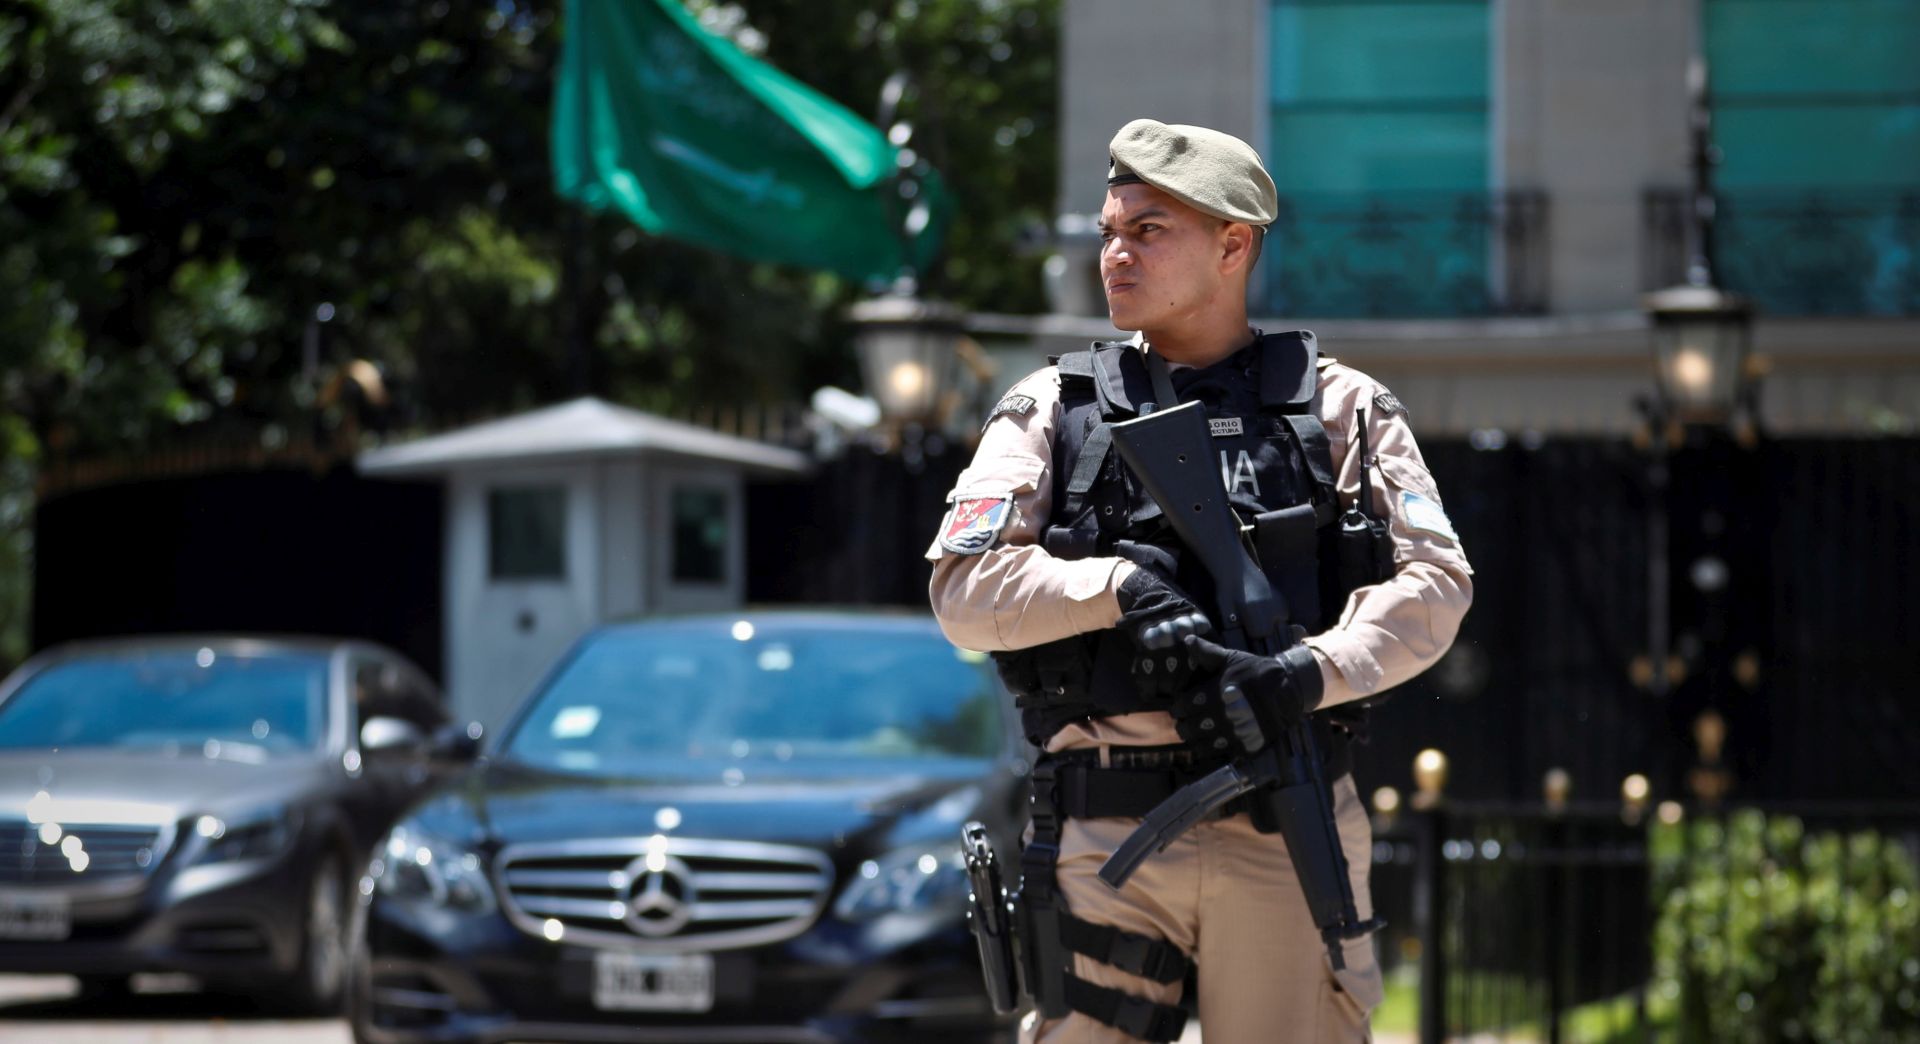 epa07195350 Strong security measures in front of the embassy of Saudi Arabia after the arrival of the Saudi Crown Prince, Mohamed bin Salman, in Buenos Aires, Argentina, 28 November 2018. Mohamed bin Salman arrived in Buenos Aires to participate in the G20 summit running from 30 November – 01 December 2018  which will bring together the heads of State or Government of the 20 largest developed economies.  EPA/Juan Ignacio Roncoroni